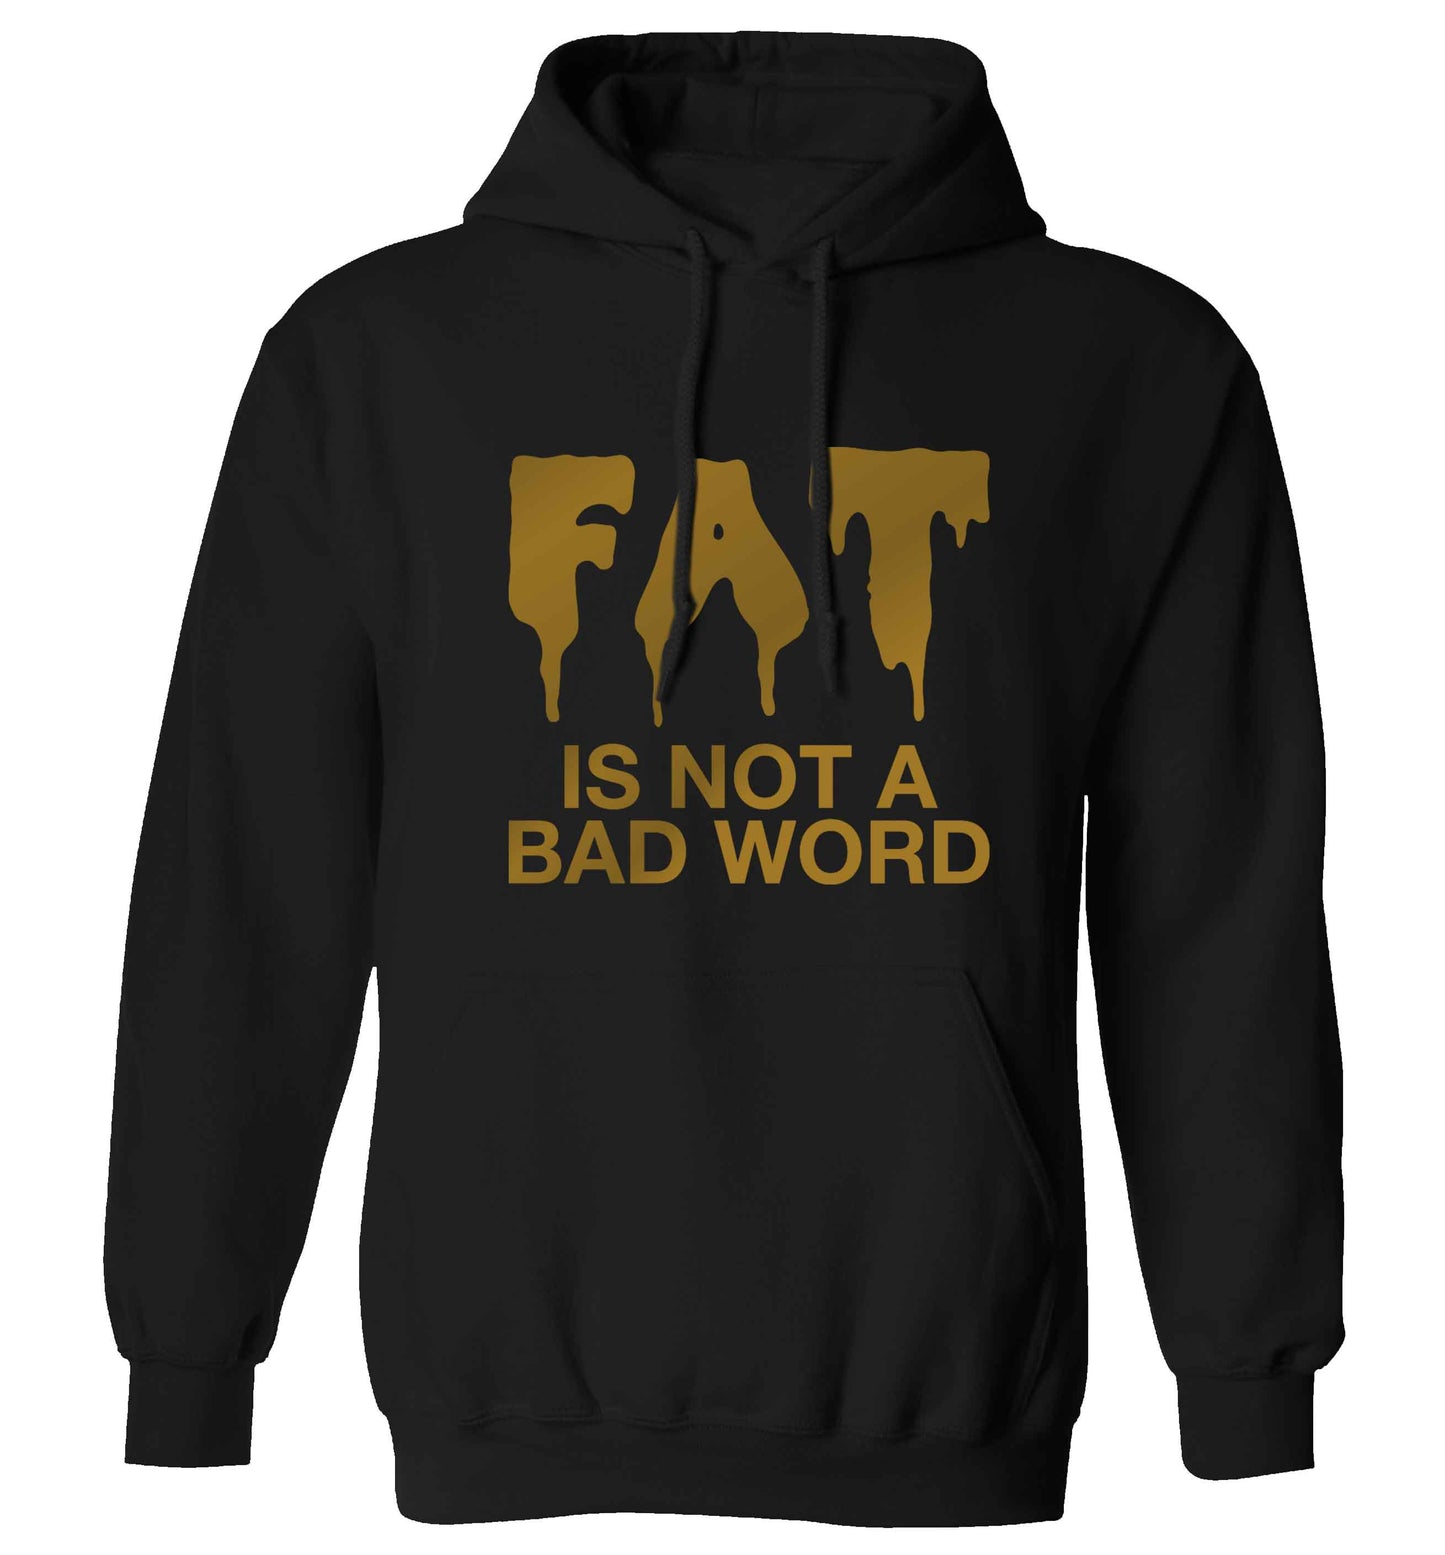 Fat is not a bad word adults unisex black hoodie 2XL